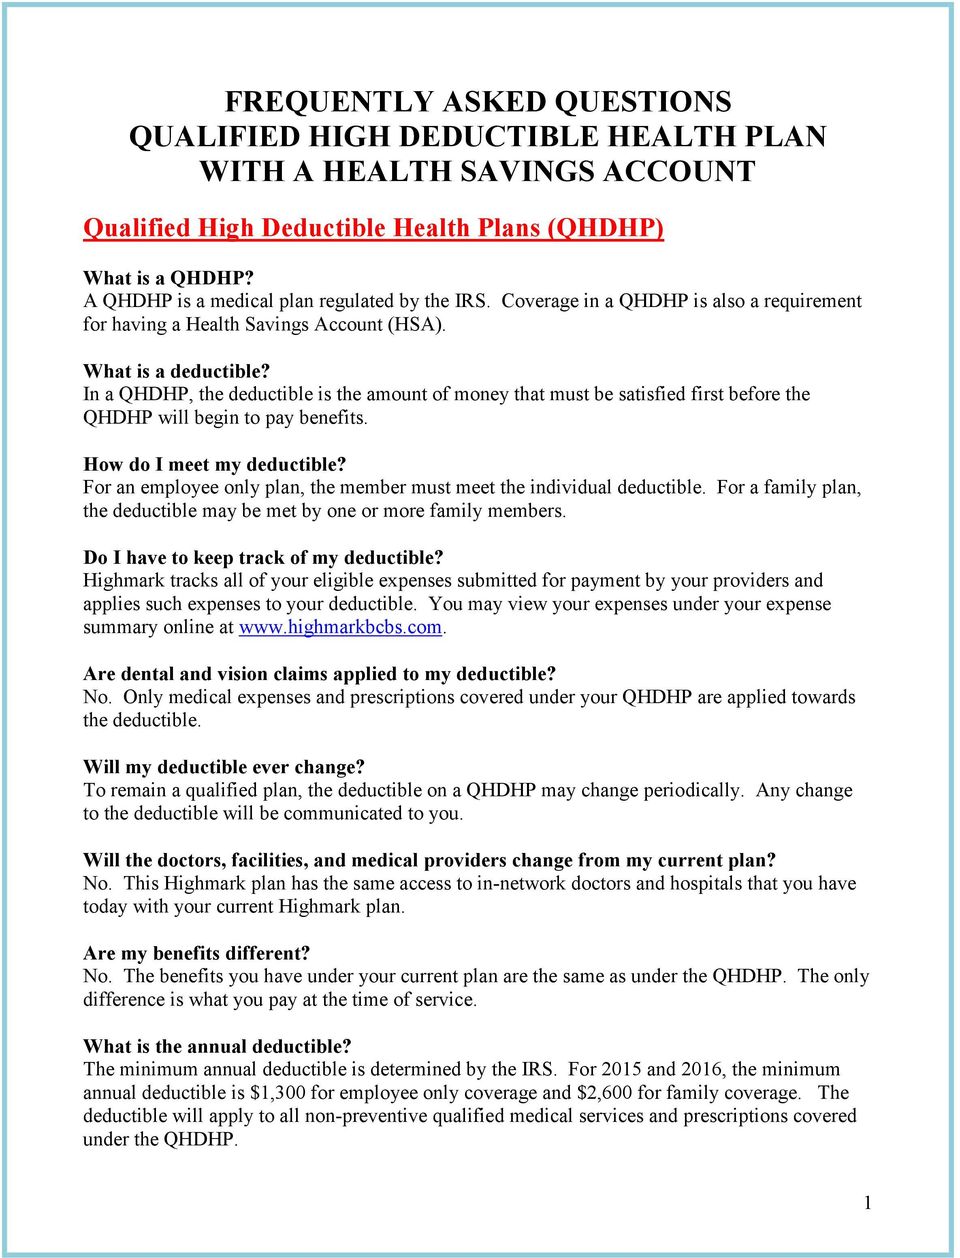 In a QHDHP, the deductible is the amount of money that must be satisfied first before the QHDHP will begin to pay benefits. How do I meet my deductible?